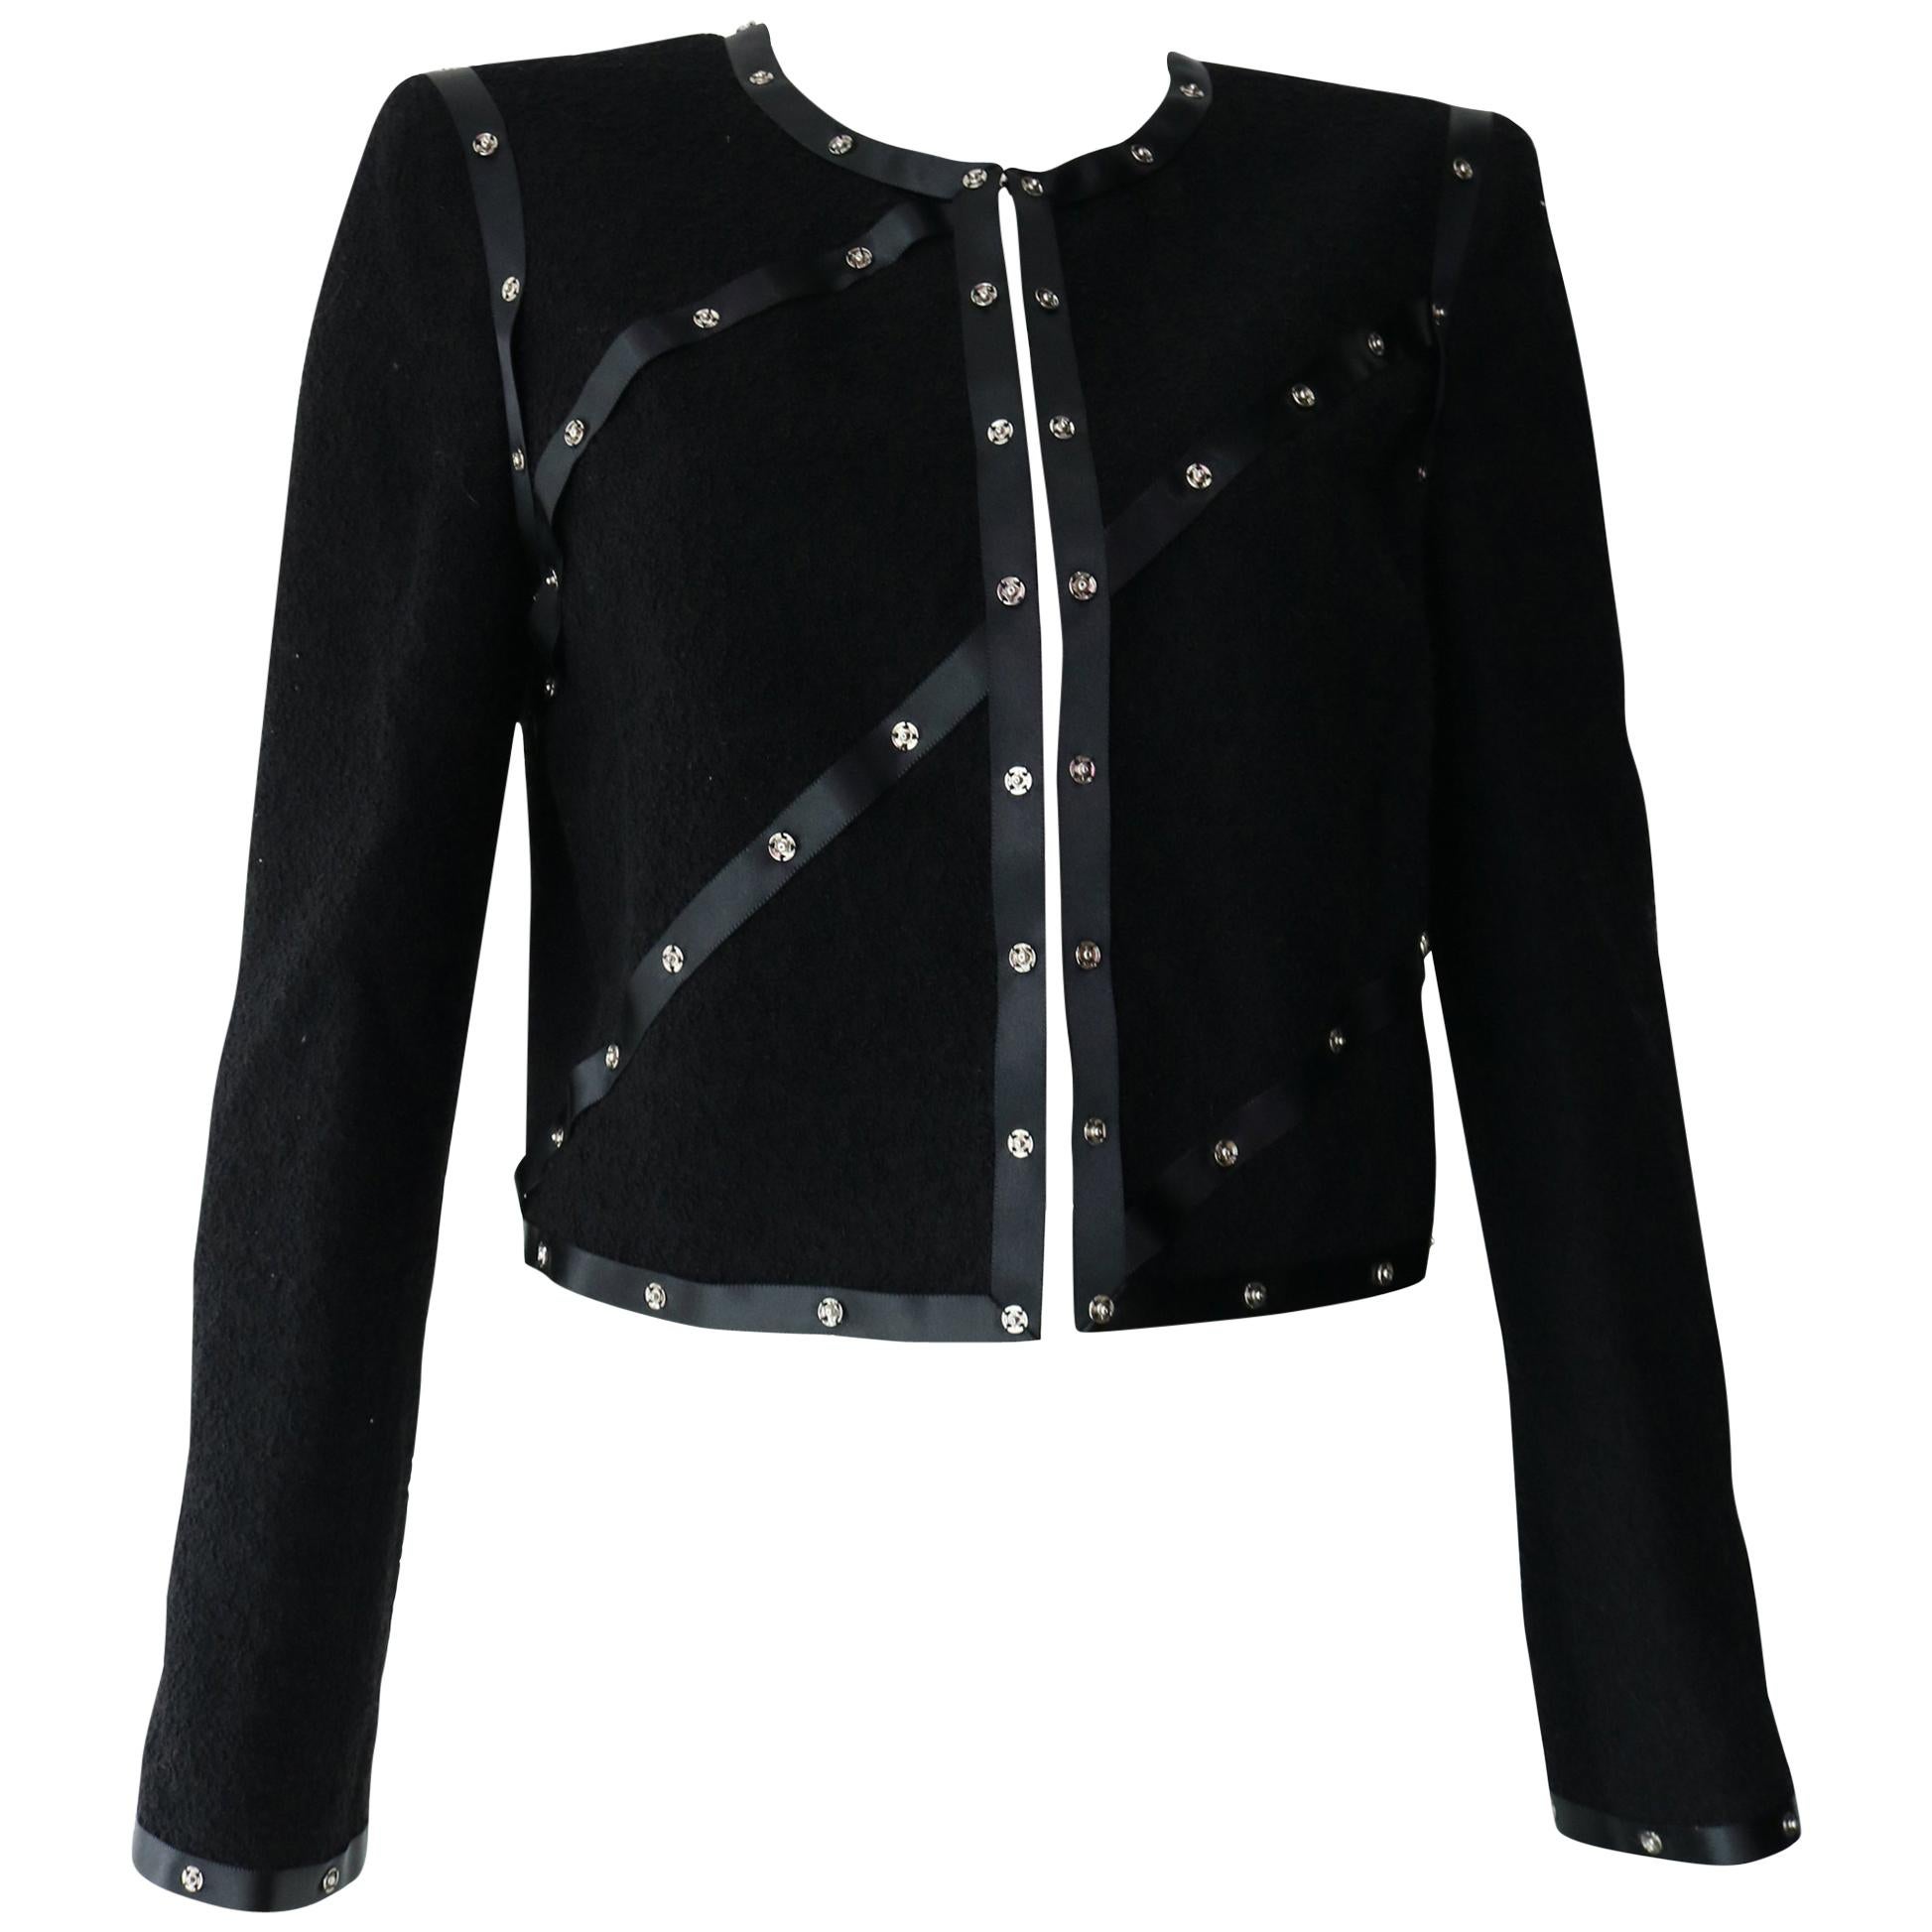 Chanel Black Embellished Jacket  with silver grommets Size M FALL 2003